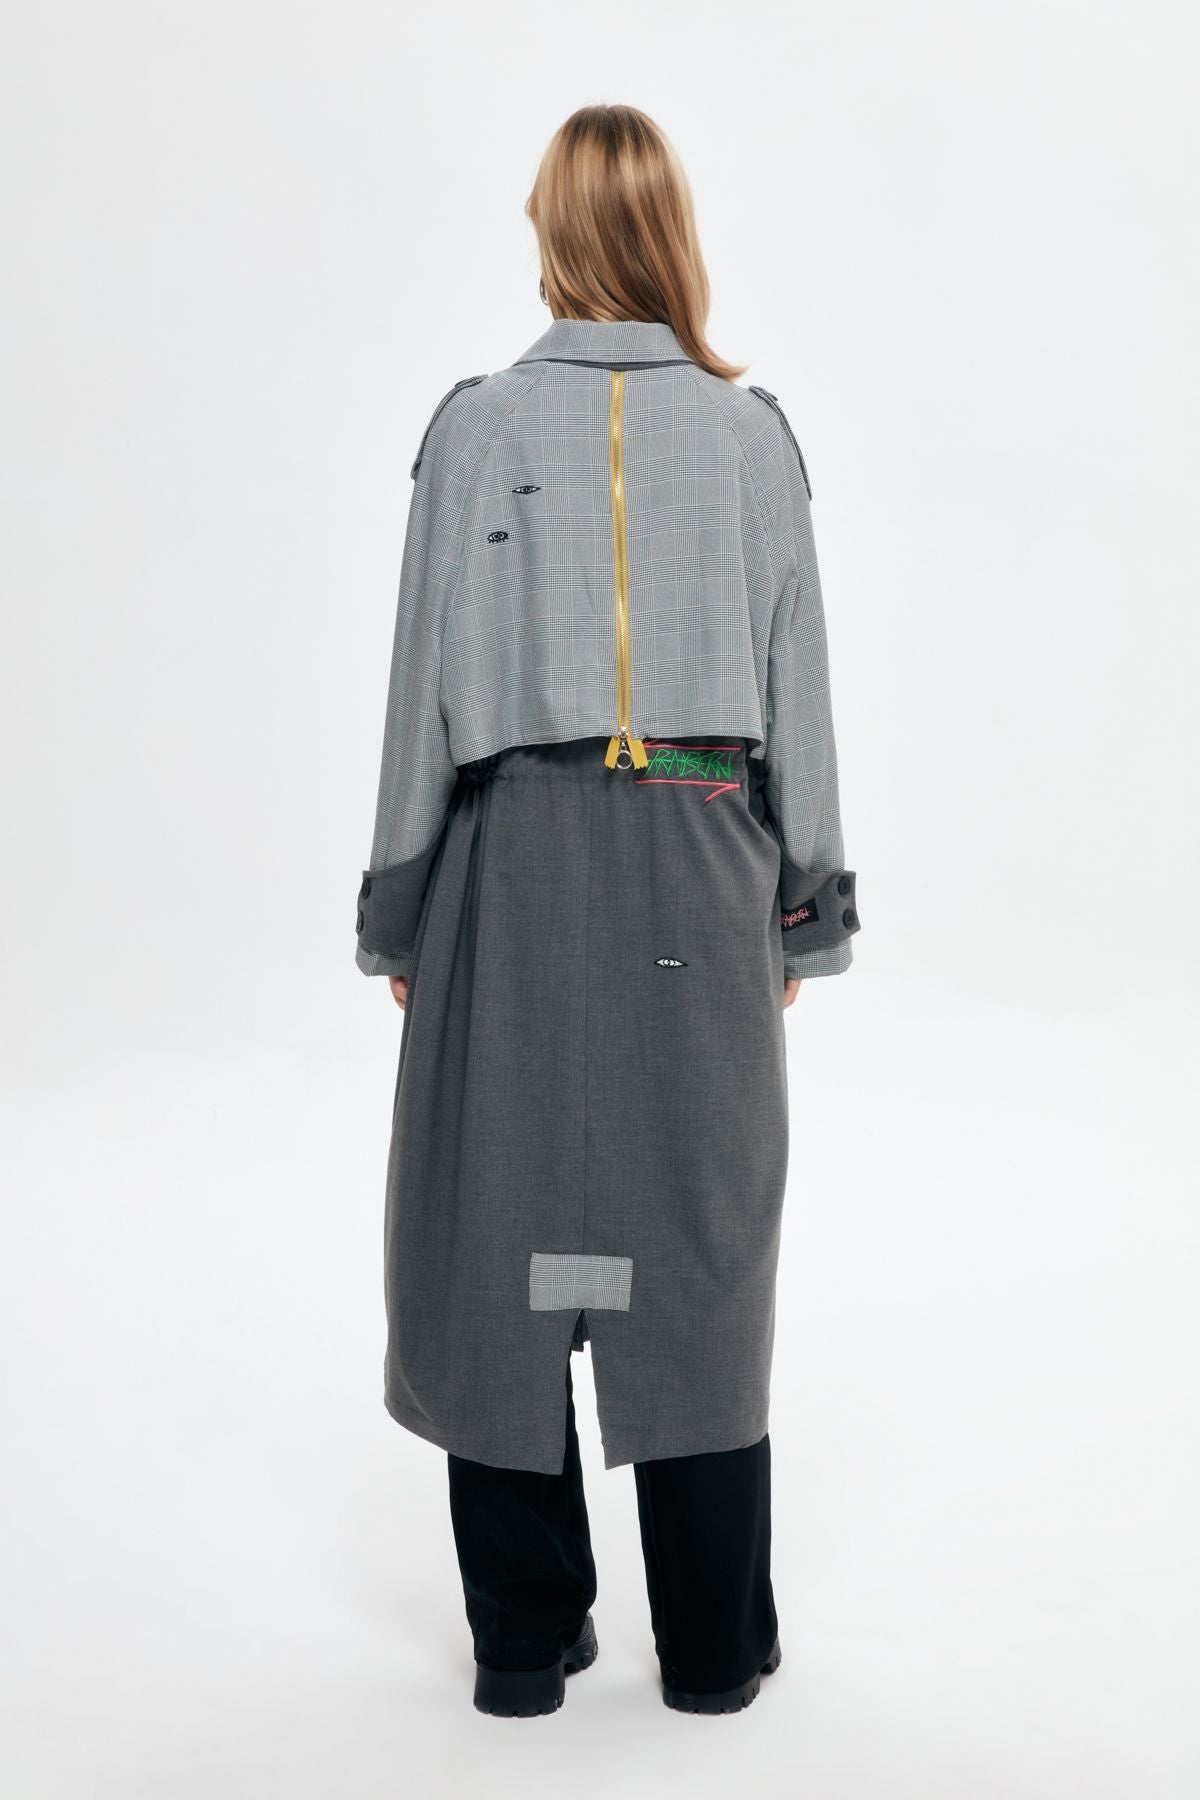 Zipper Detailed Colorful Patterned Trench Coat Gray